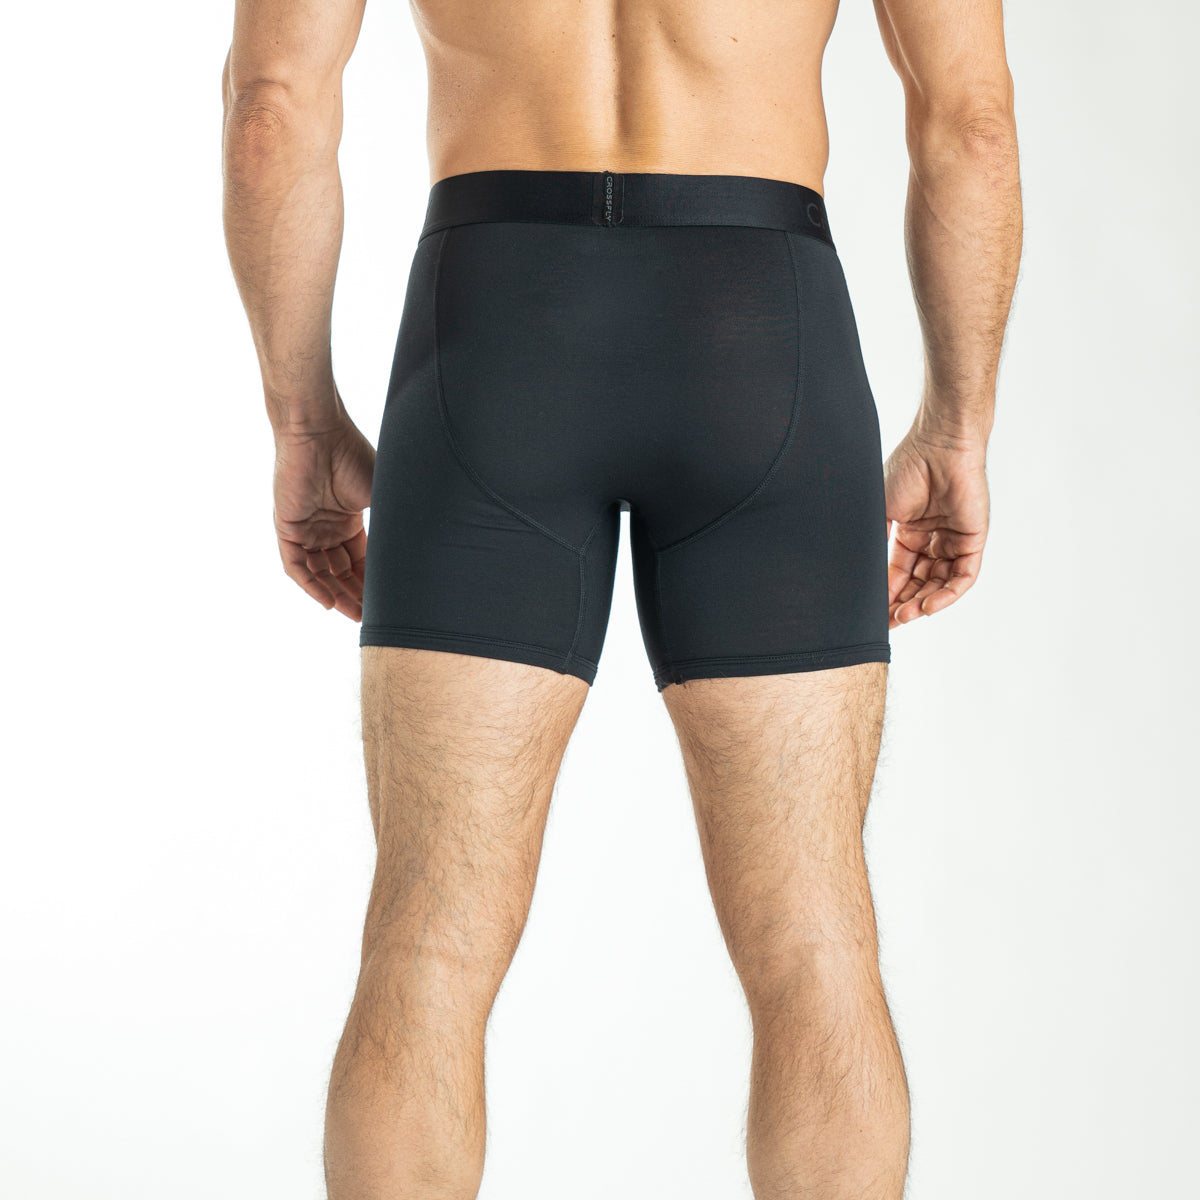 Model wear the Crossfly IKON 6&quot; Boxer in Black. Photo is of back of model showing the back section of Crossfly IKON 6&quot; Boxers in black.